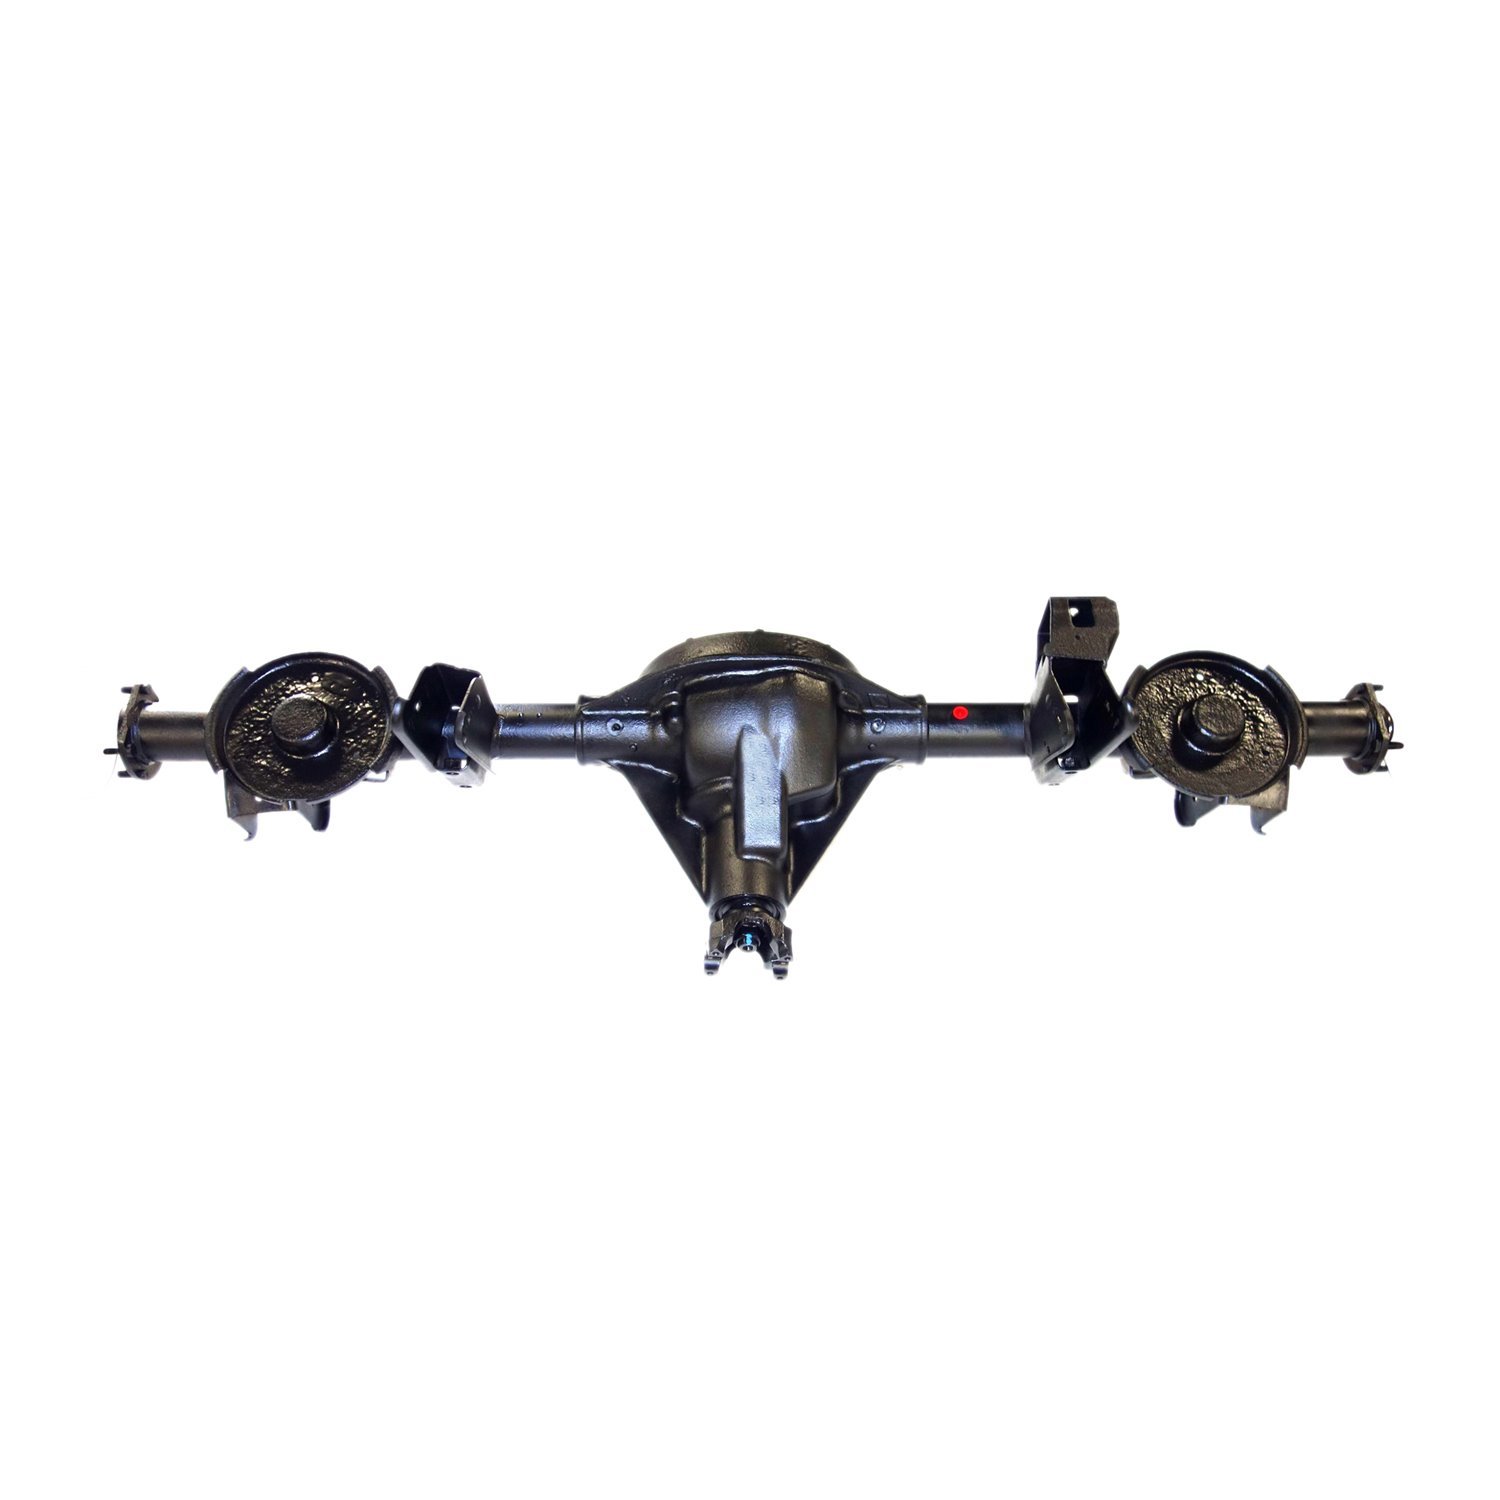 Remanufactured Complete Axle Assembly for Dana 35 90-95 Jeep Wrangler 3.07 Ratio w/o ABS